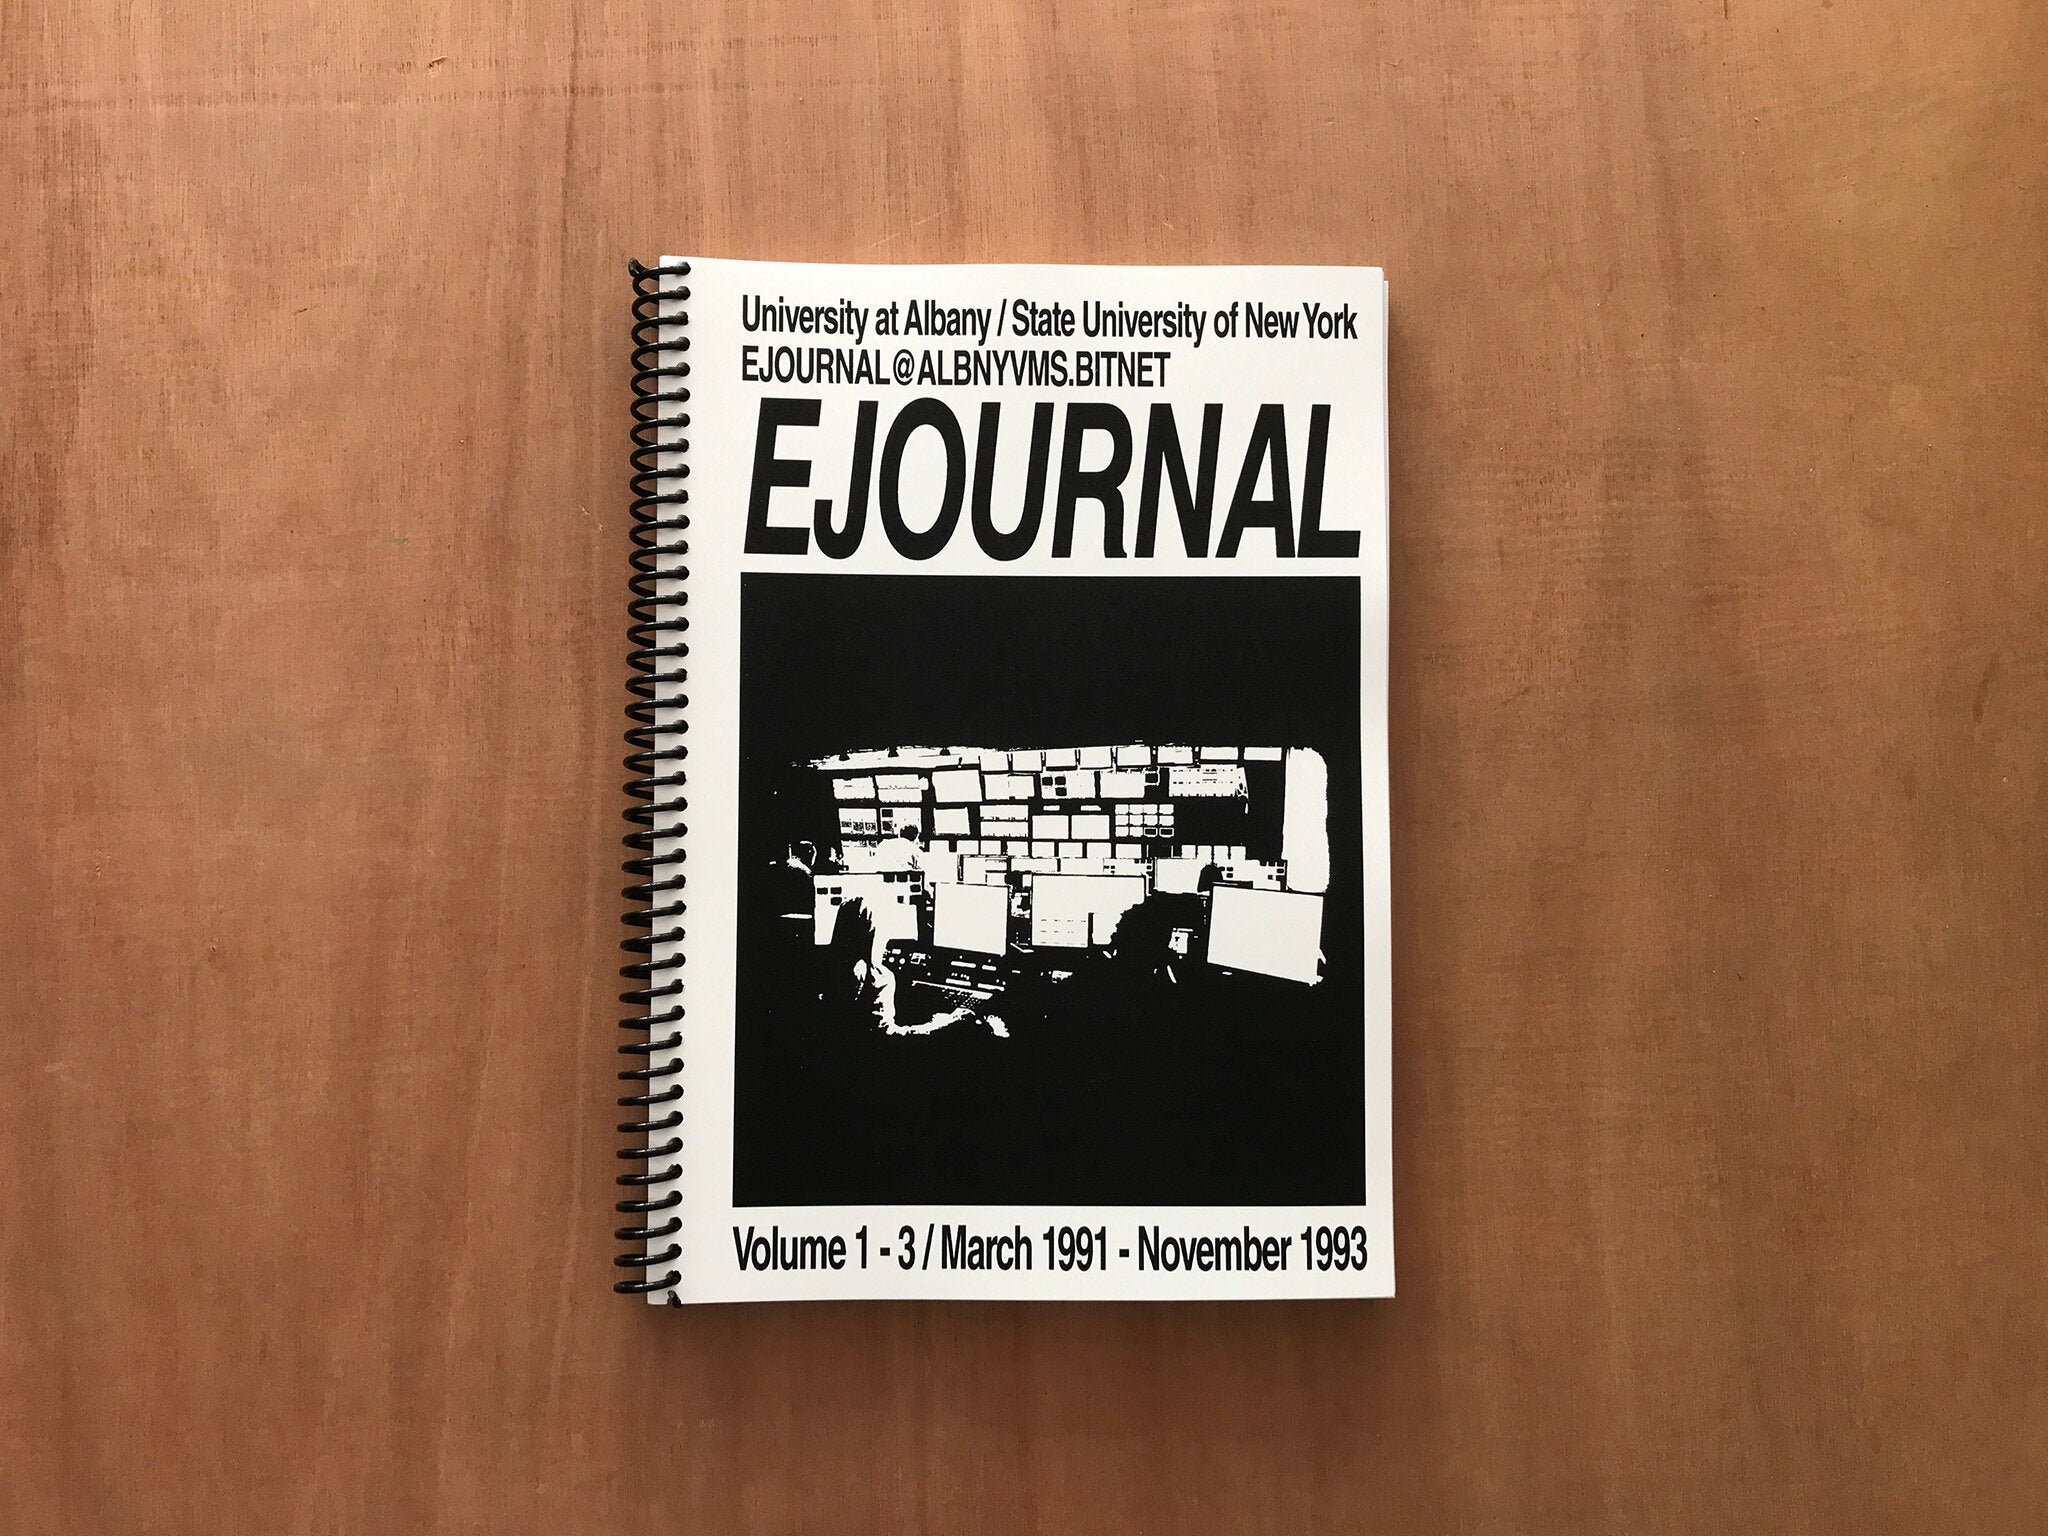 EJOURNAL Volume 1-3 by Robin N